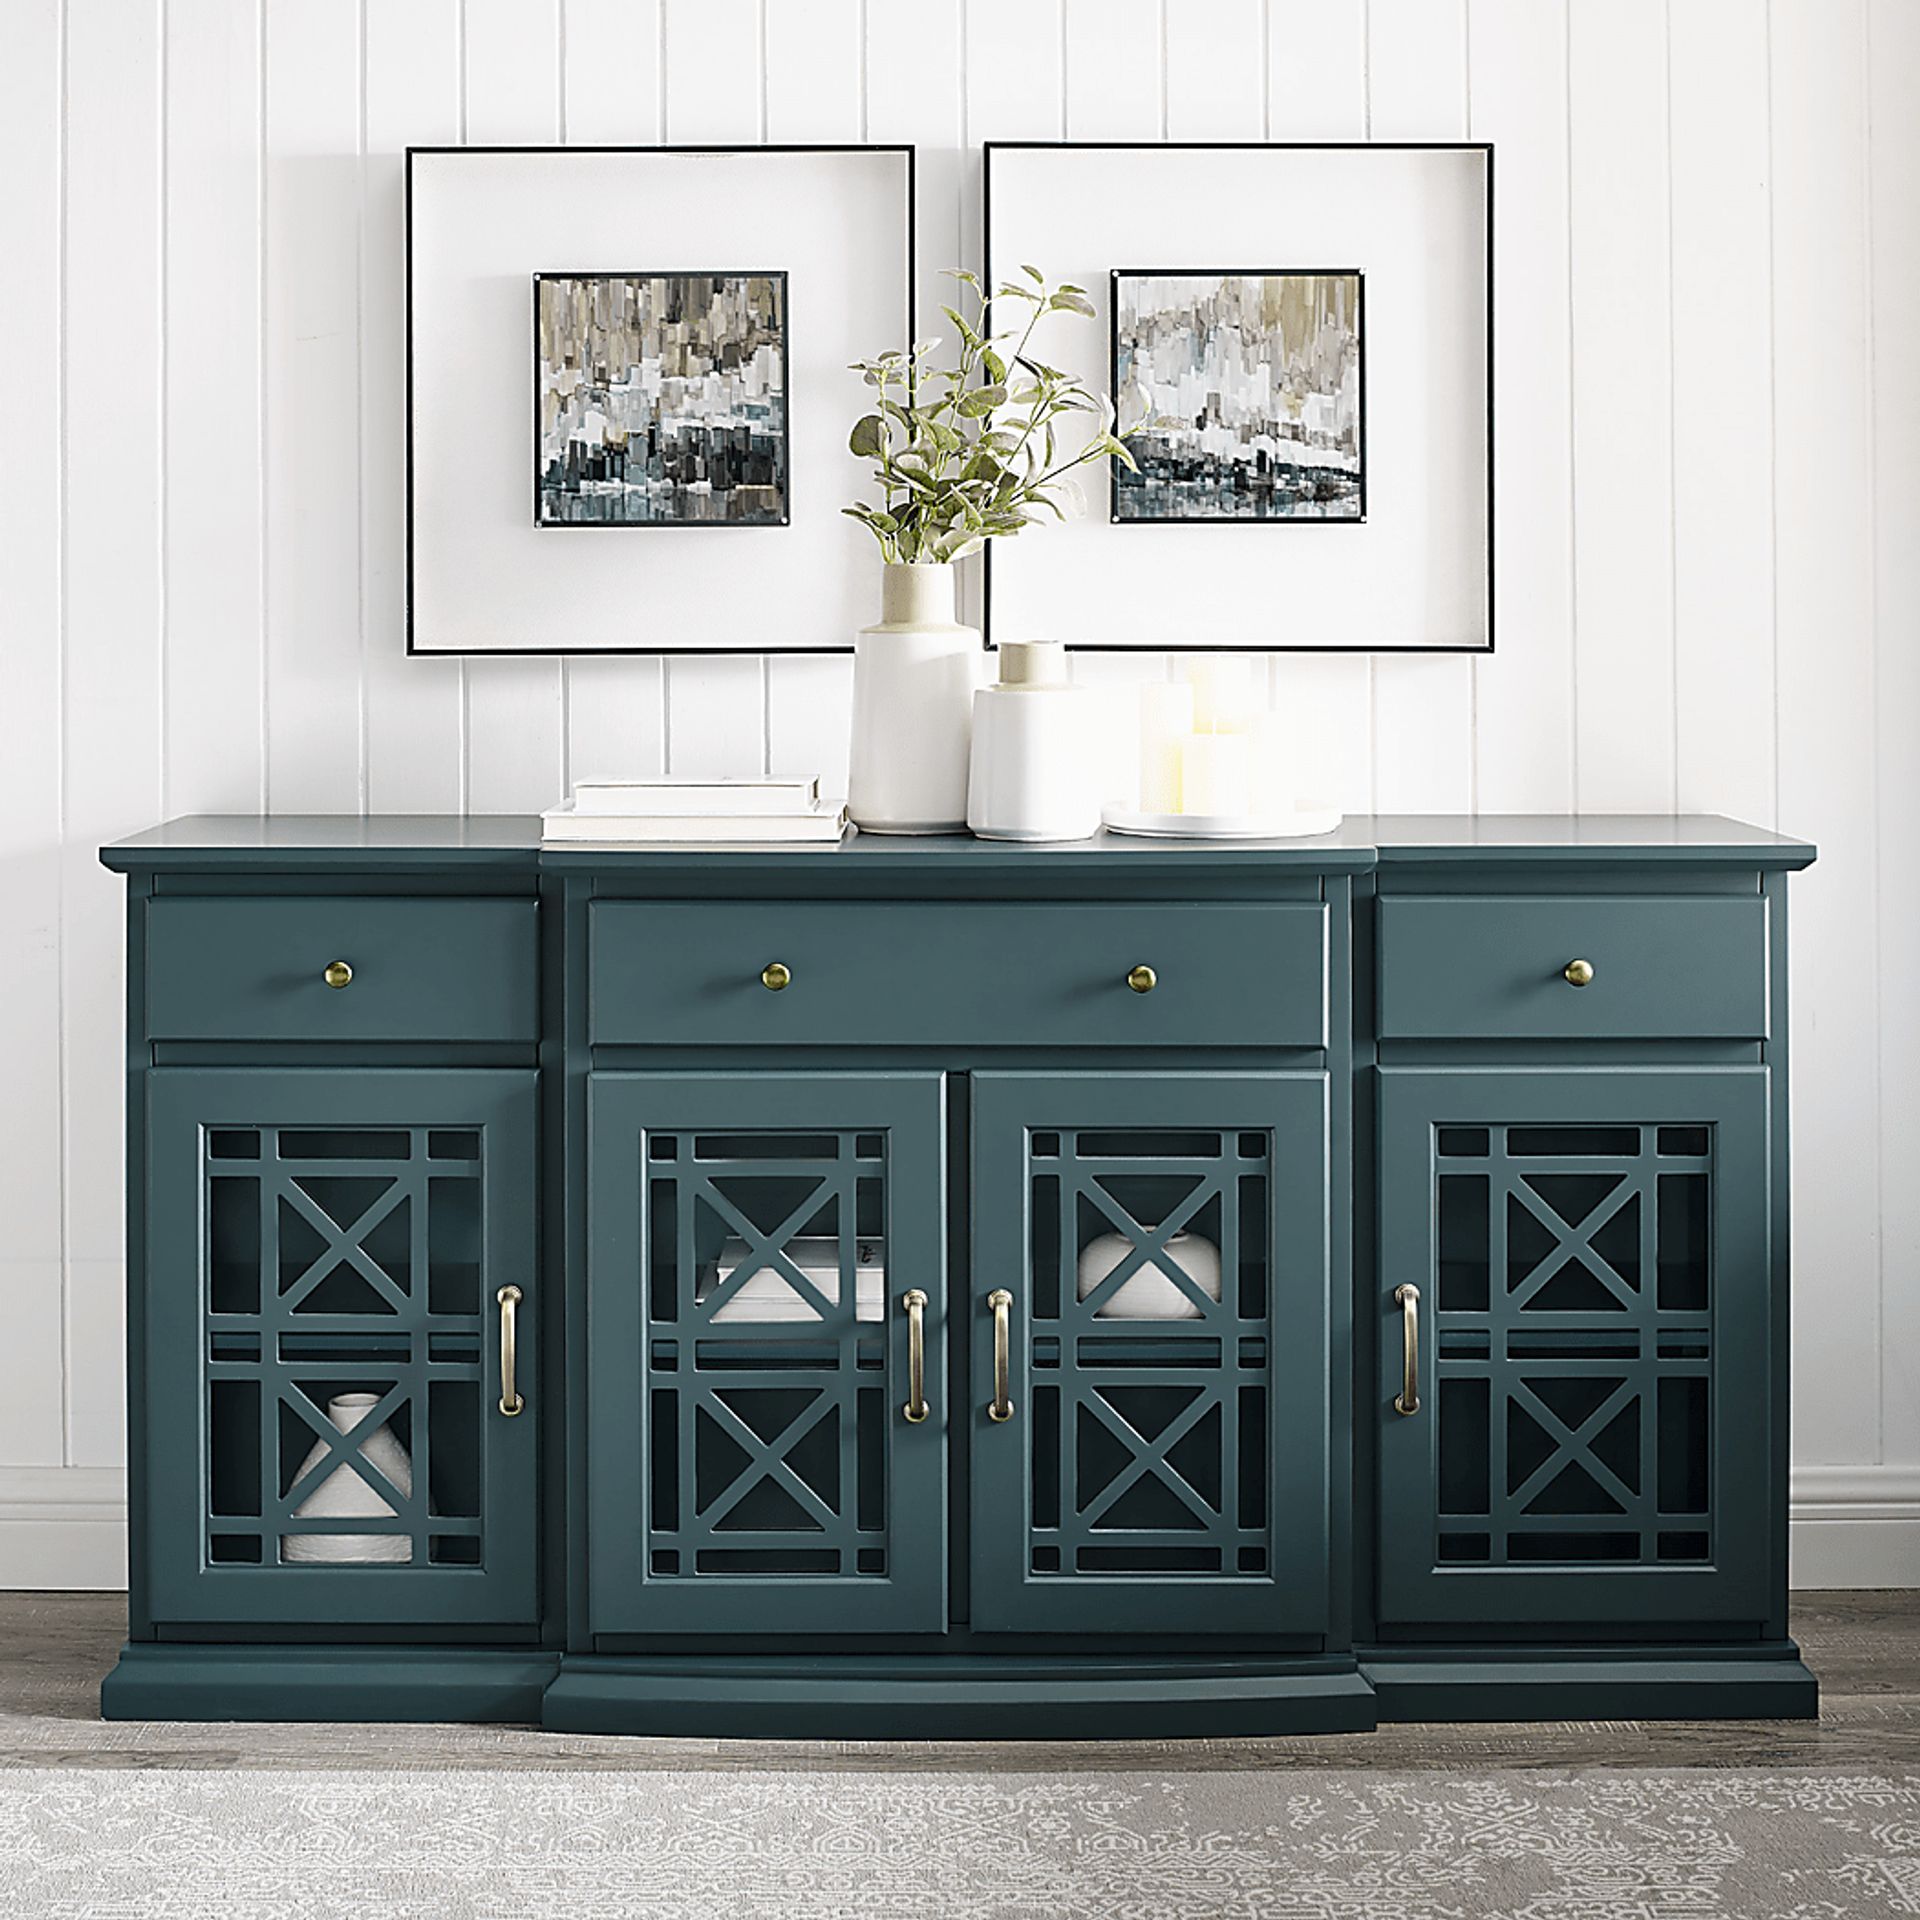 Sagestar Teal Colors Sideboard | Rooms to Go